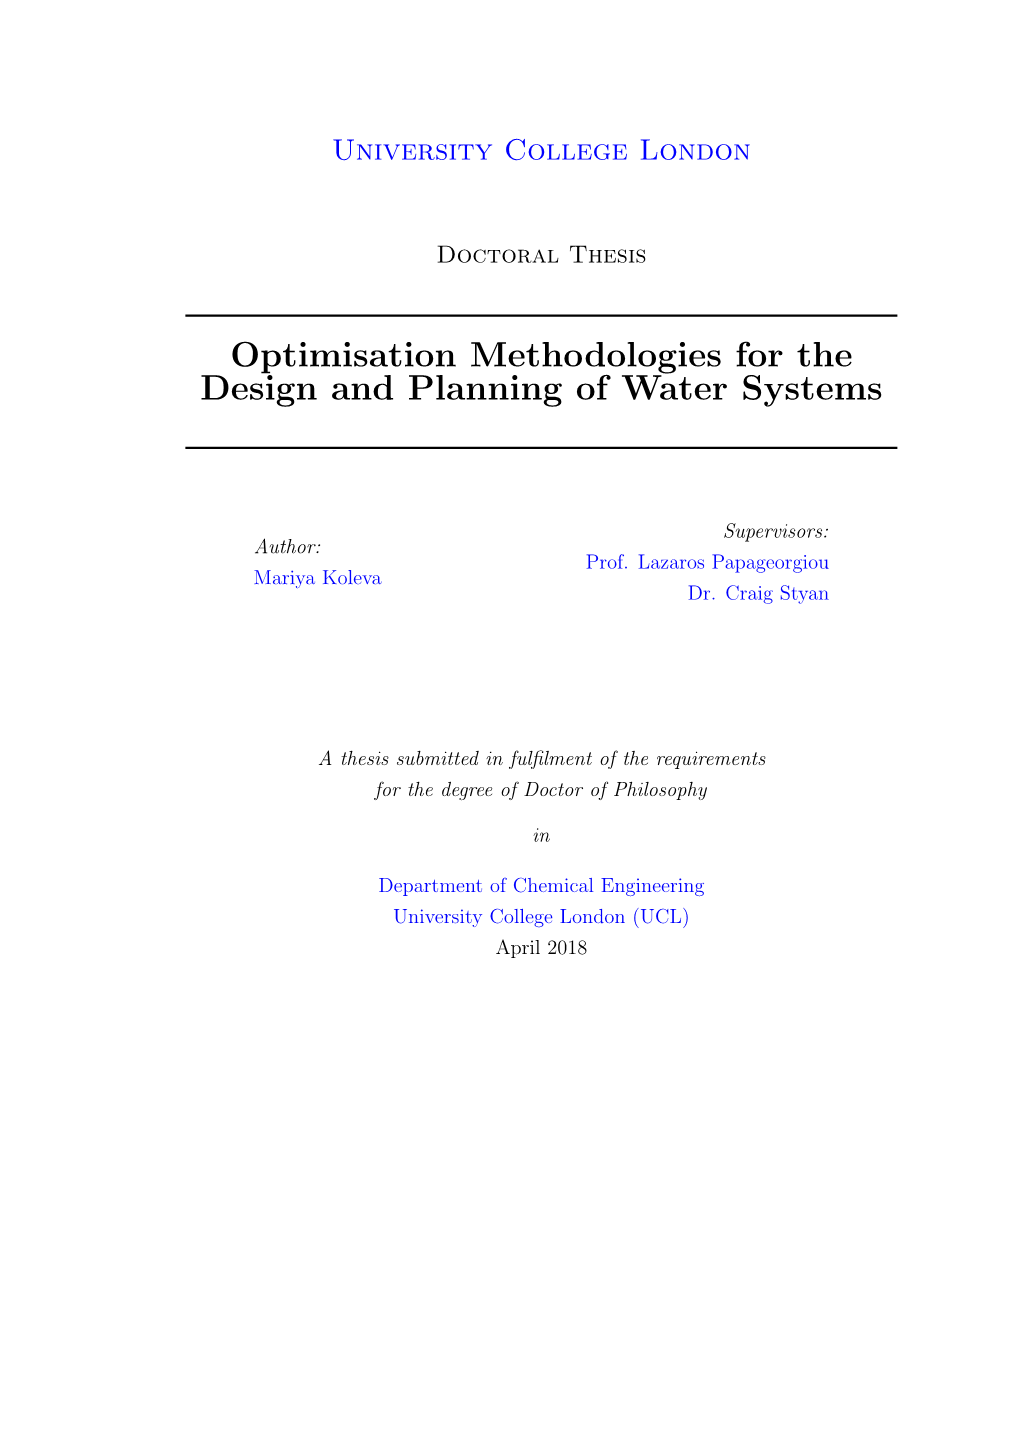 Optimisation Methodologies for the Design and Planning of Water Systems